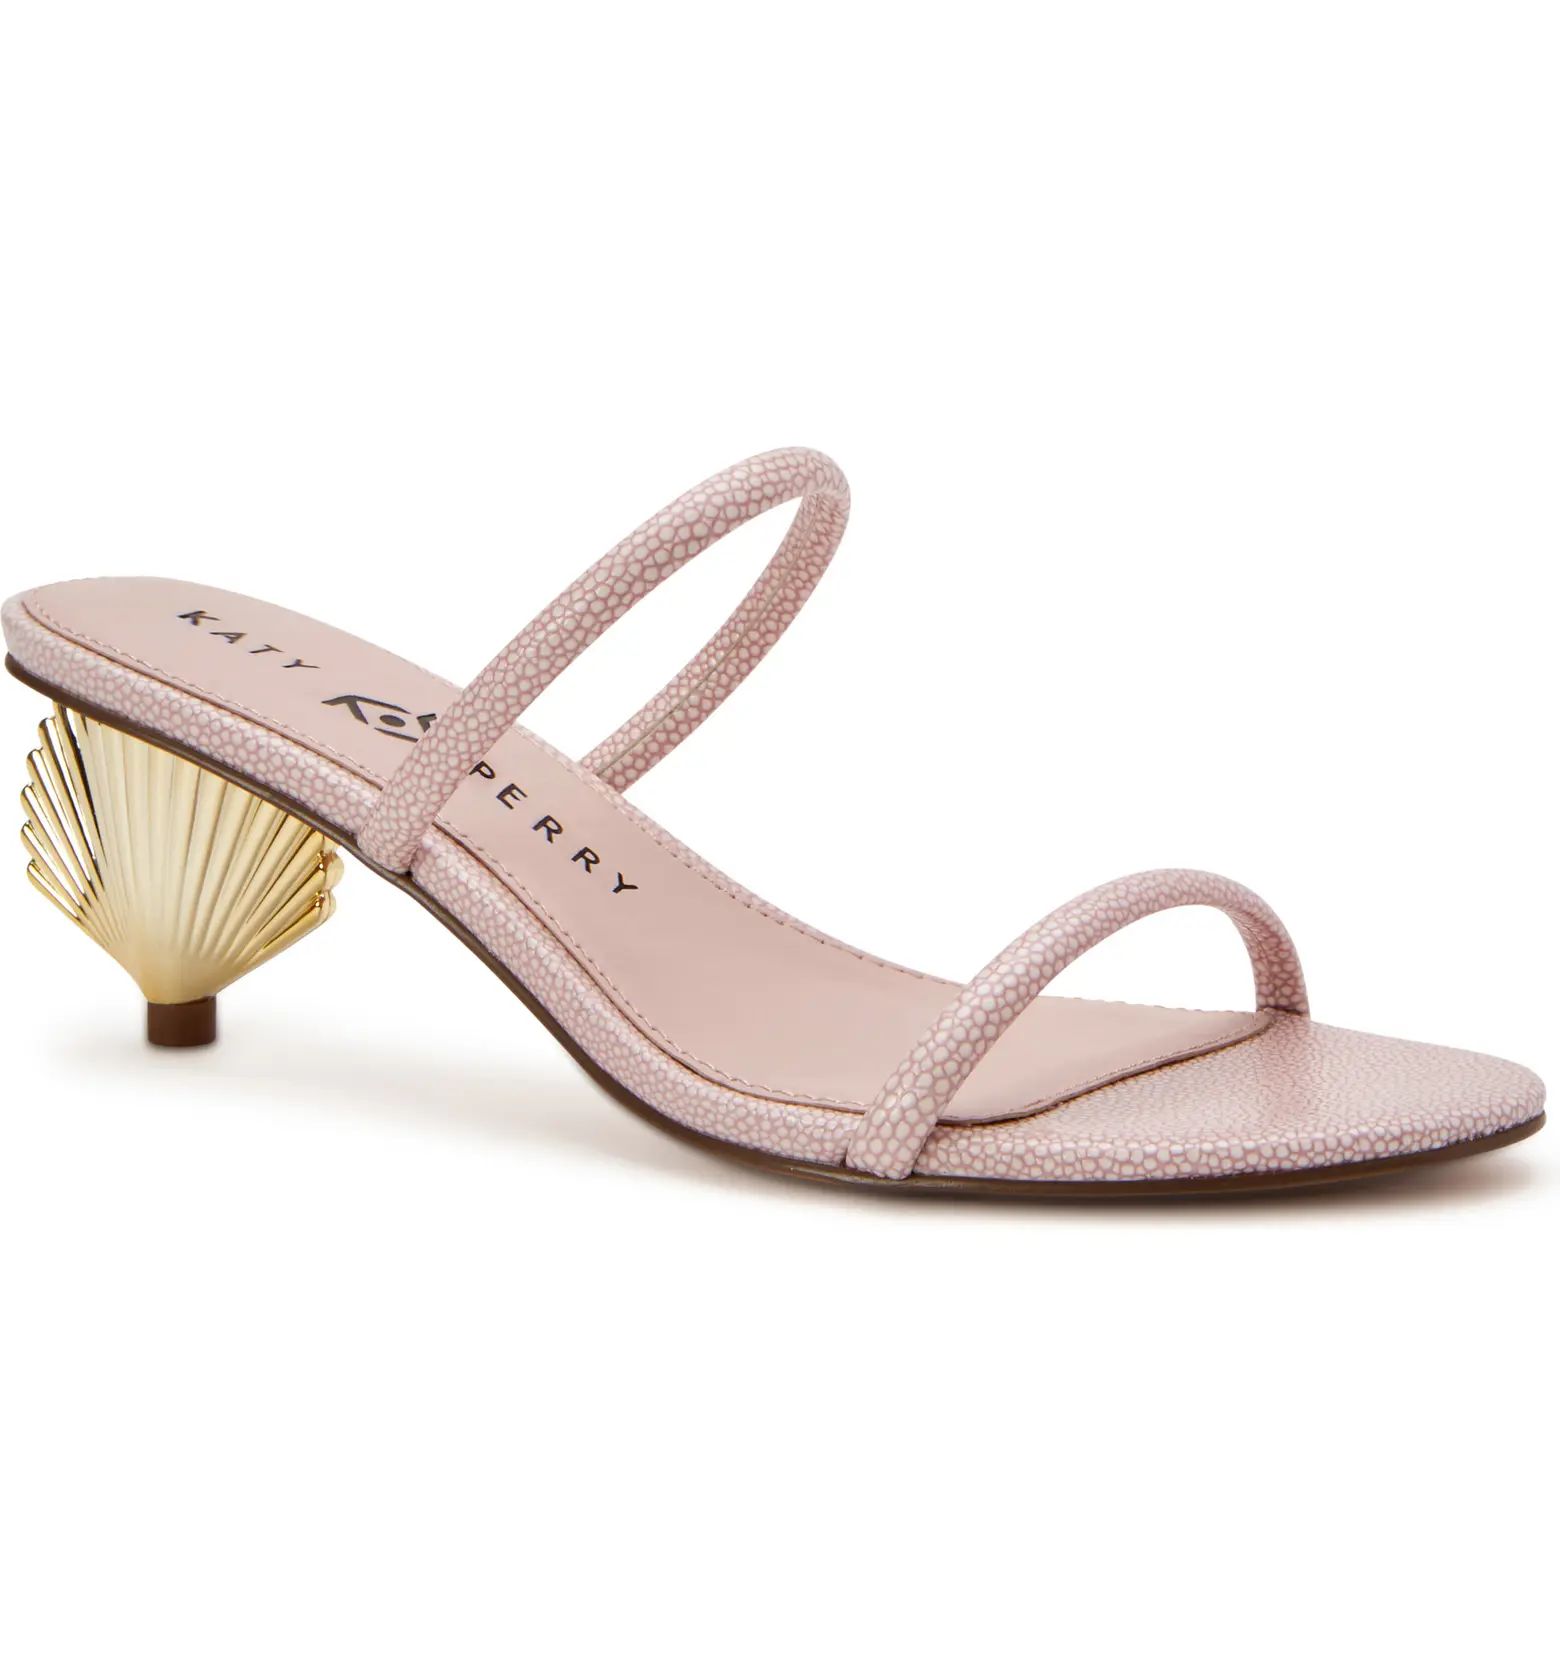 Katy Perry The Scalloped Shell Sandal | Nordstrom | Nordstrom